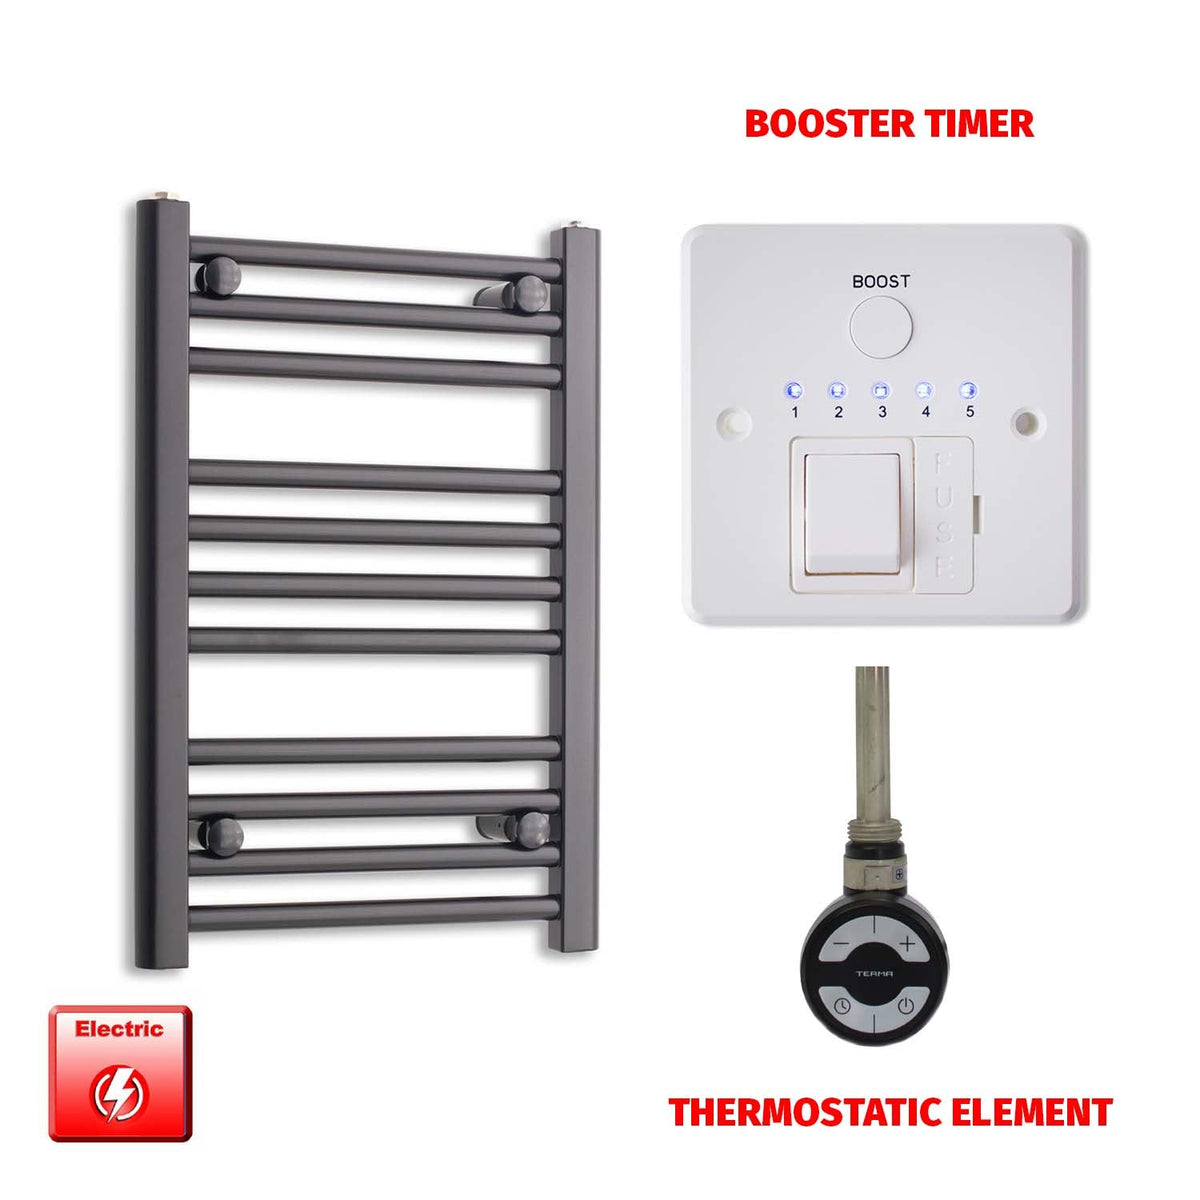 600 x 400 Flat Black Pre-Filled Electric Heated Towel Radiator HTR MOA Thermostatic Booster Timer